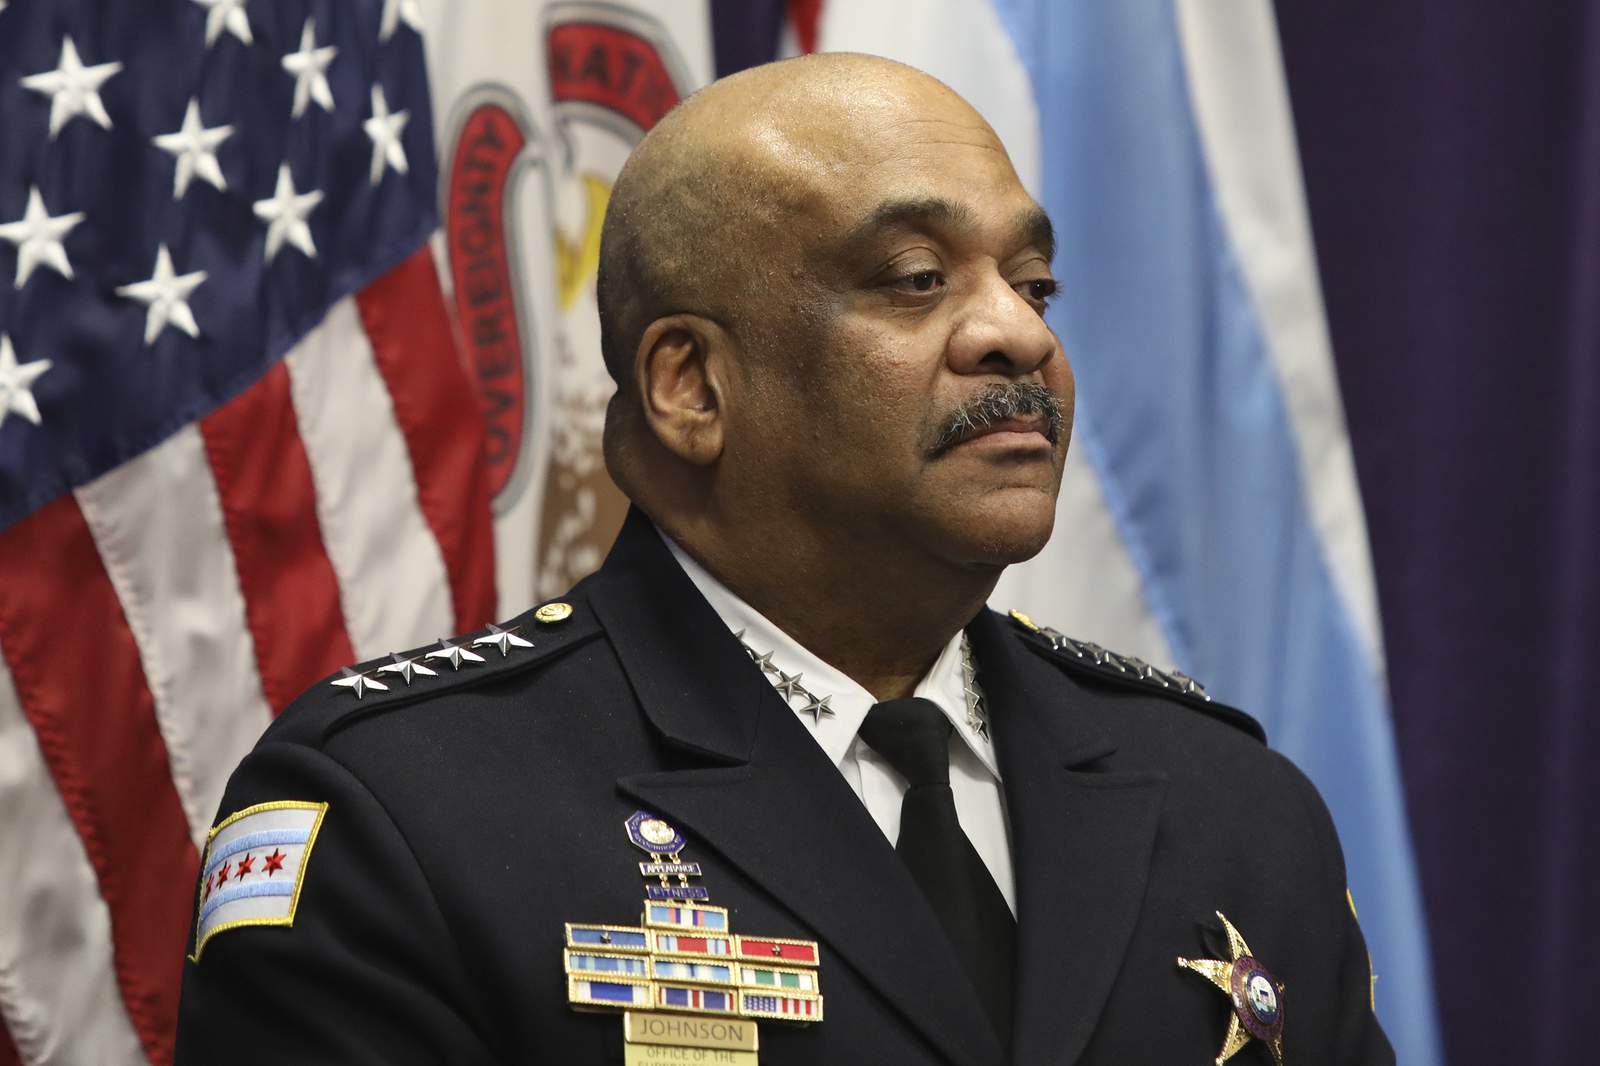 Chicago officer sues former chief for sexual harassment